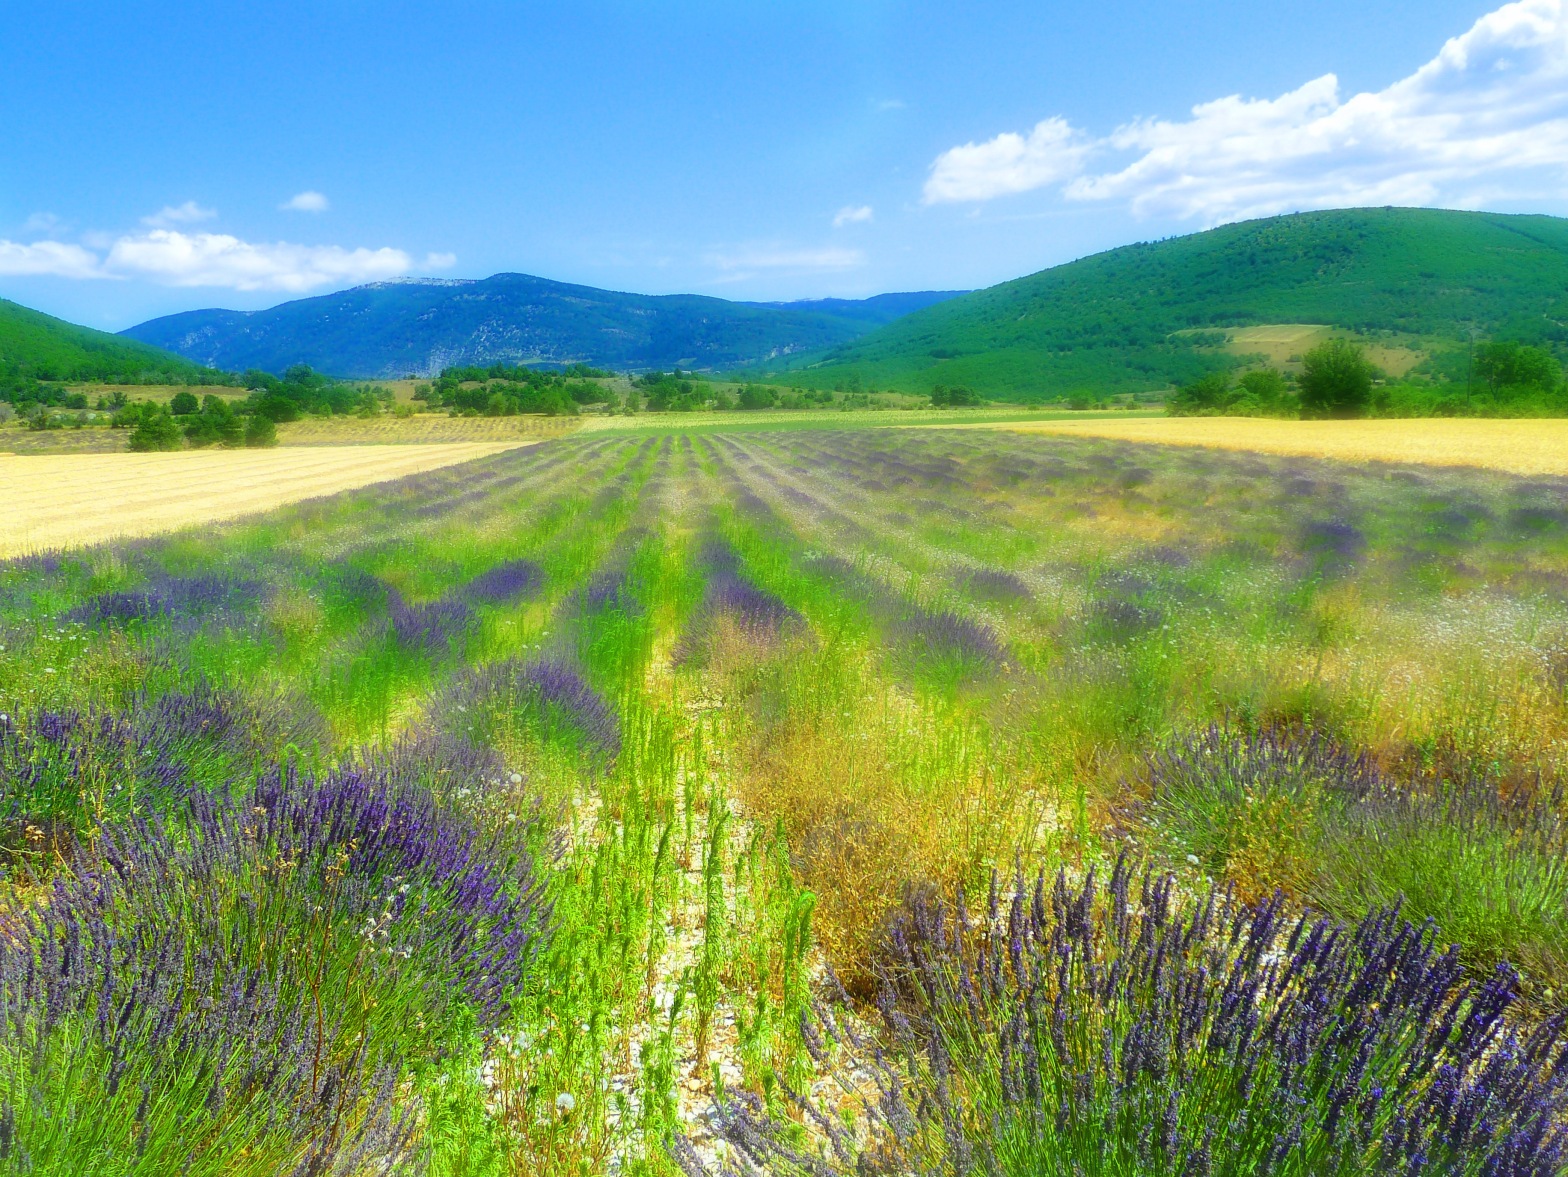 Lavender fields on the road out of Banon Provence France for French travel guide books for Kindle Unlimited